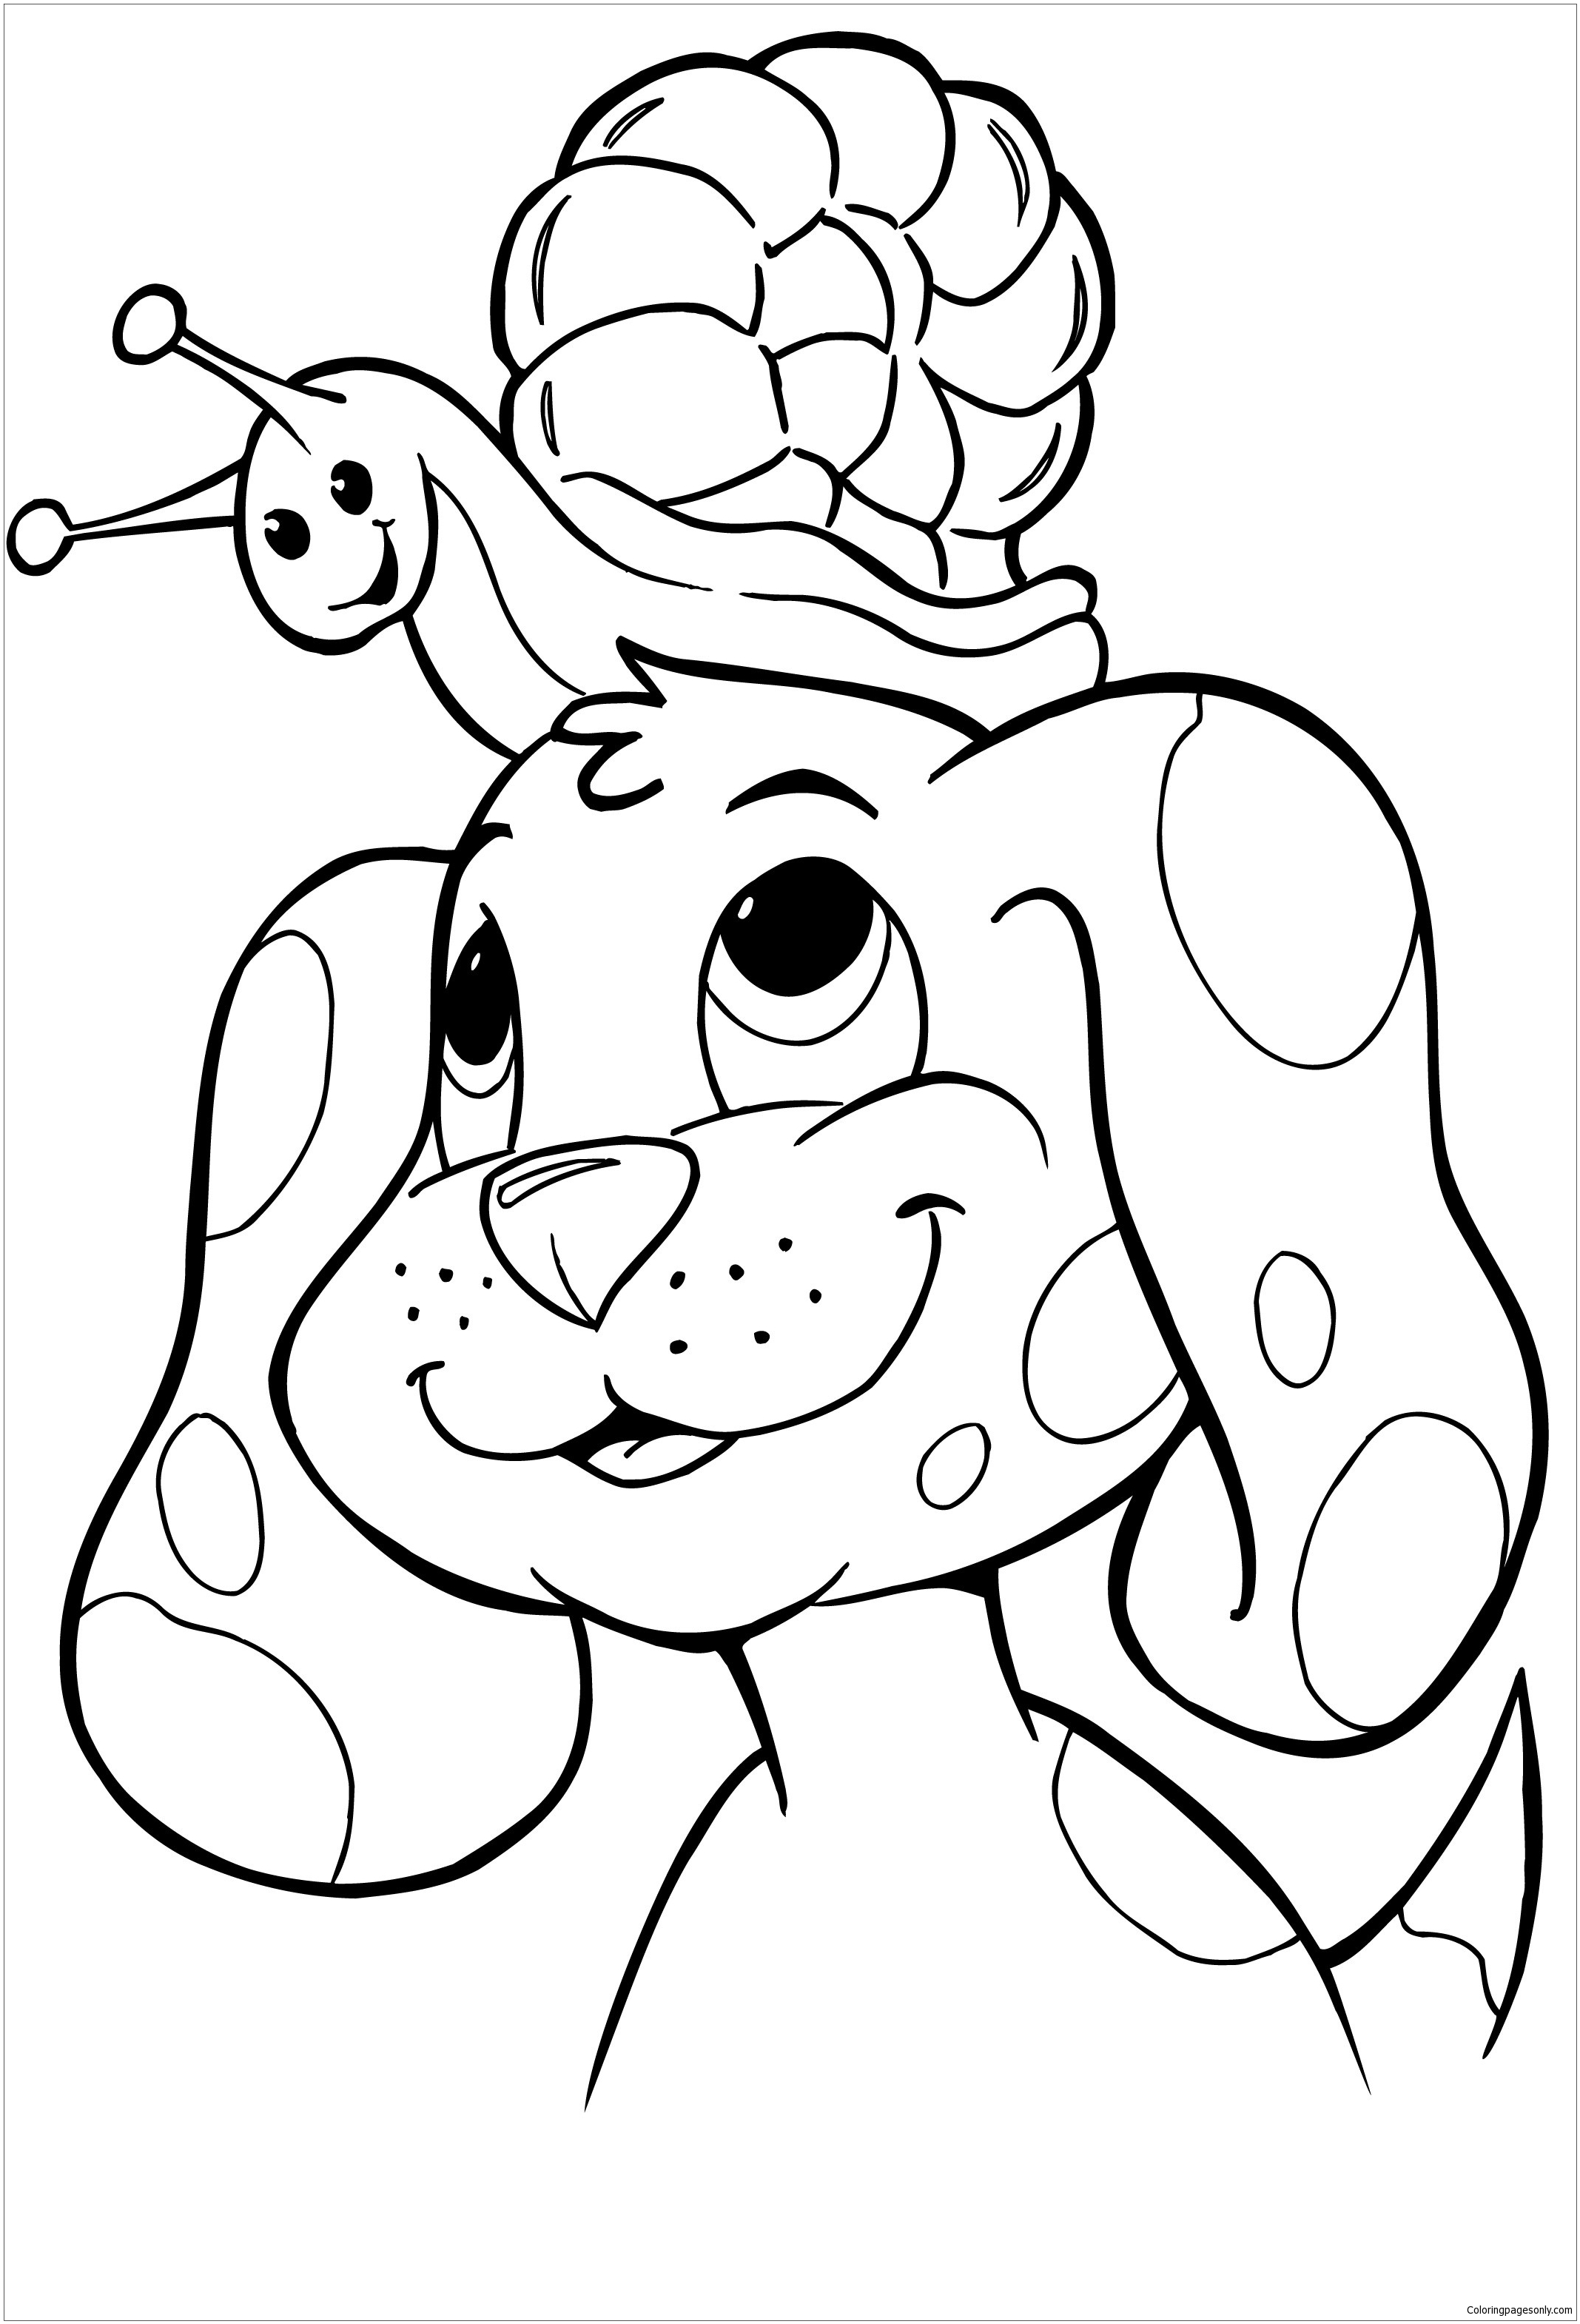 Easily Cute Puppy Coloring Page